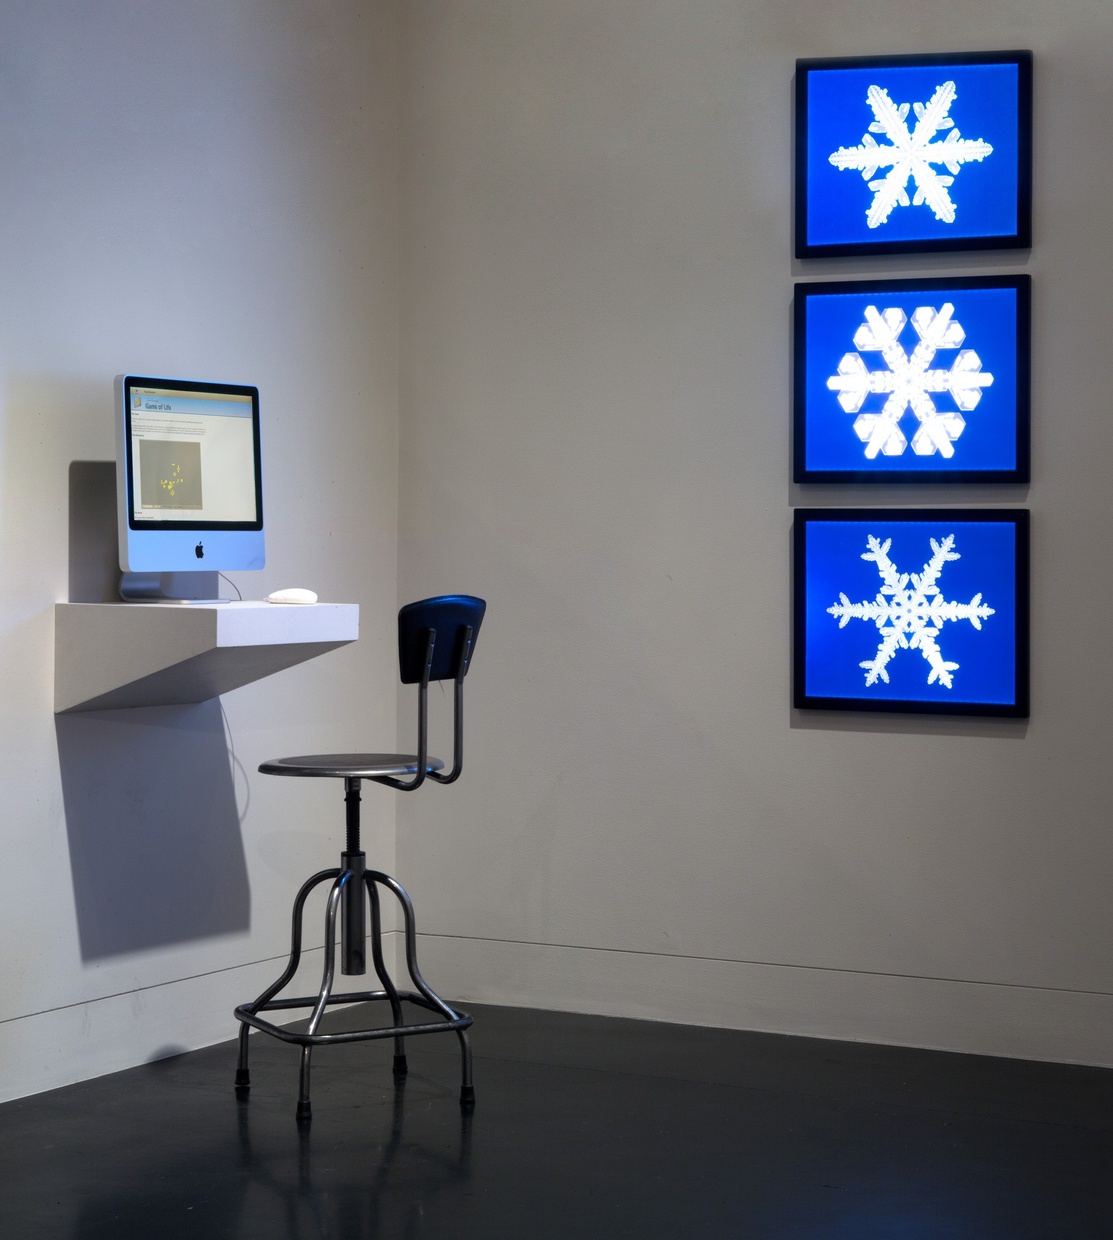 Installation view of John Conway's Game of Life and Janko Gravner and David Griffeath's *Modeling Snow Crystal Growth*, *Sixfold Symmetry: Pattern in Art and Science*, Tang Teaching Museum, 2016